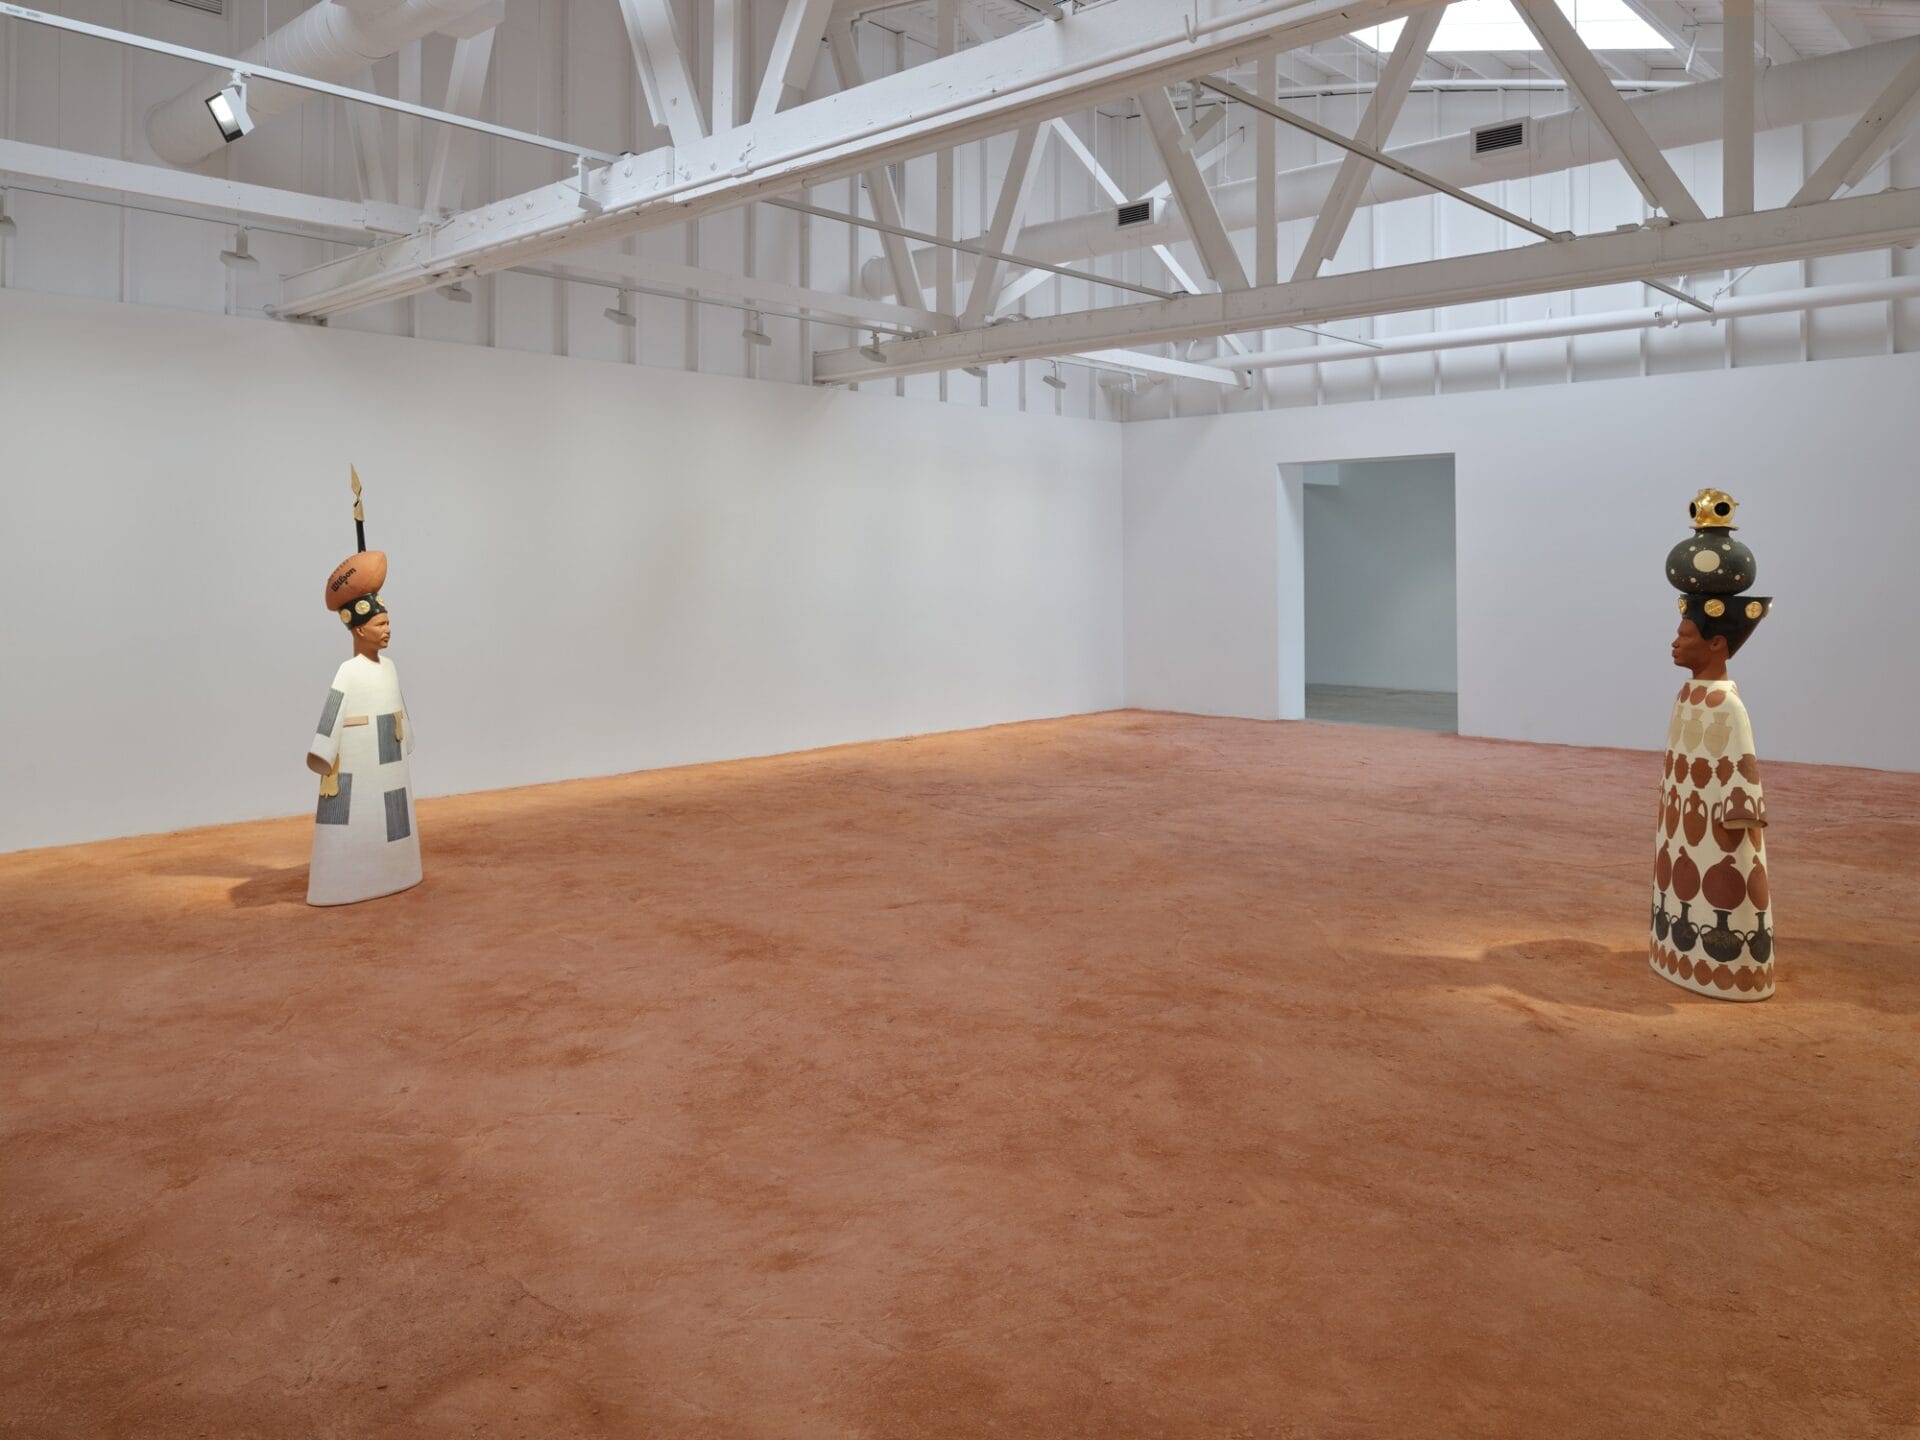 two figurative sculptures depicting explorer Matthew Henson and U.S. Army diver Andrea Crabtree, in a large gallery space with a sandy floor